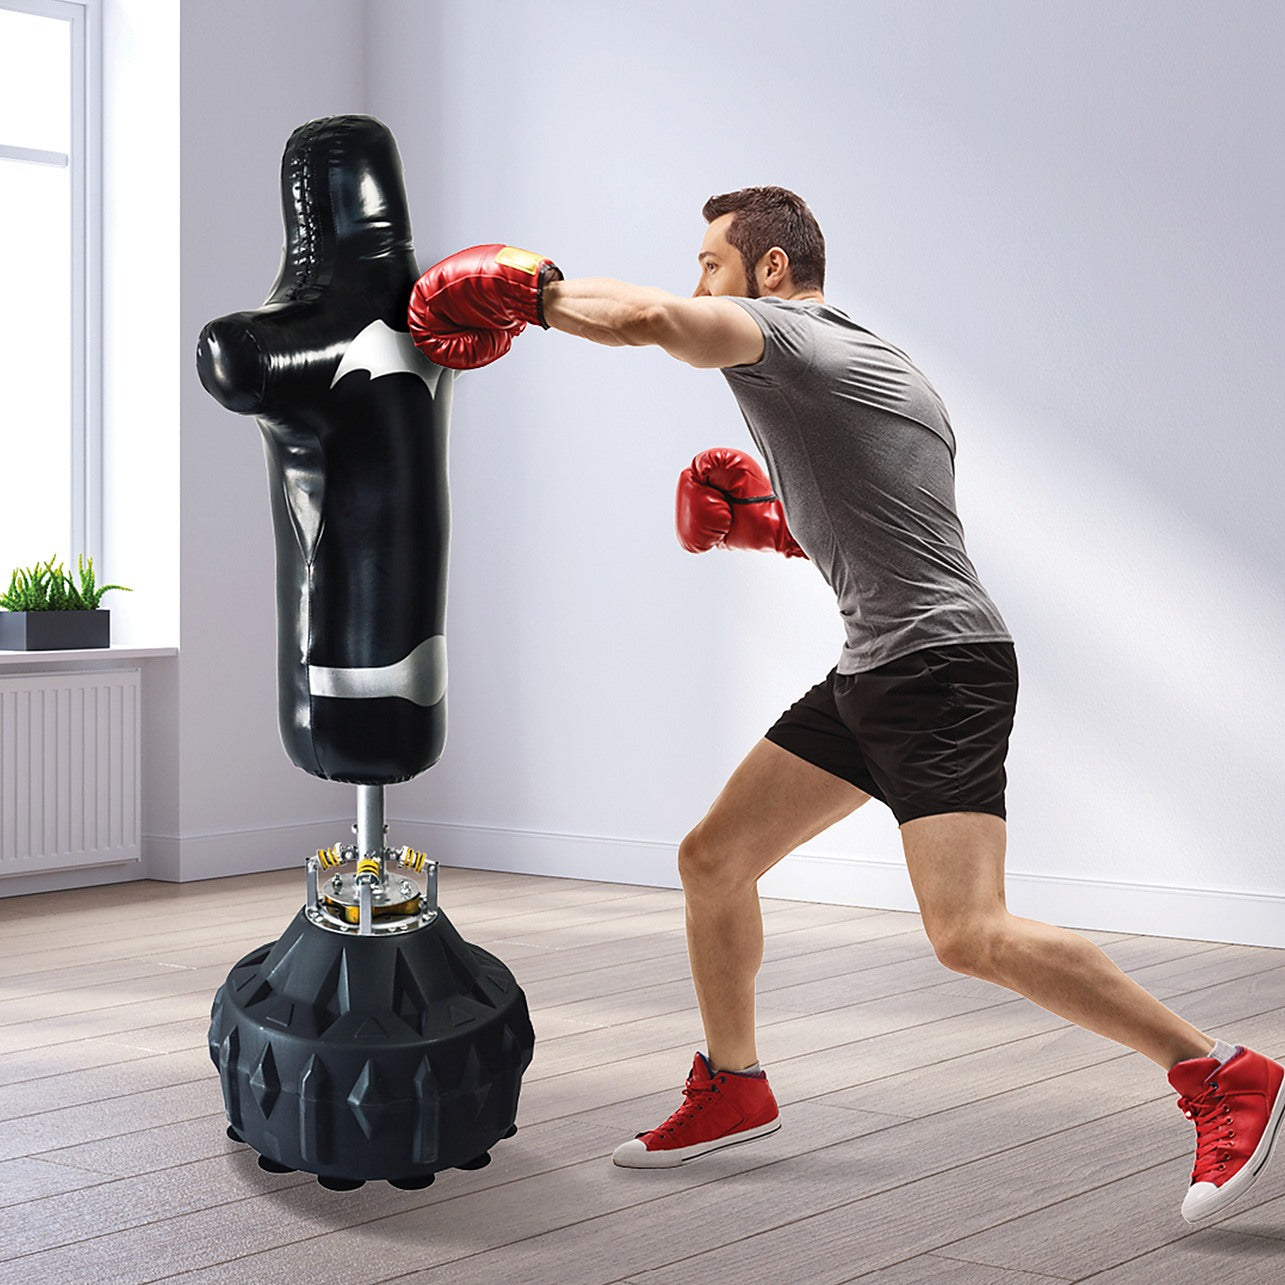 5 Boxing Elements for a Strong Body and a Strong Mind